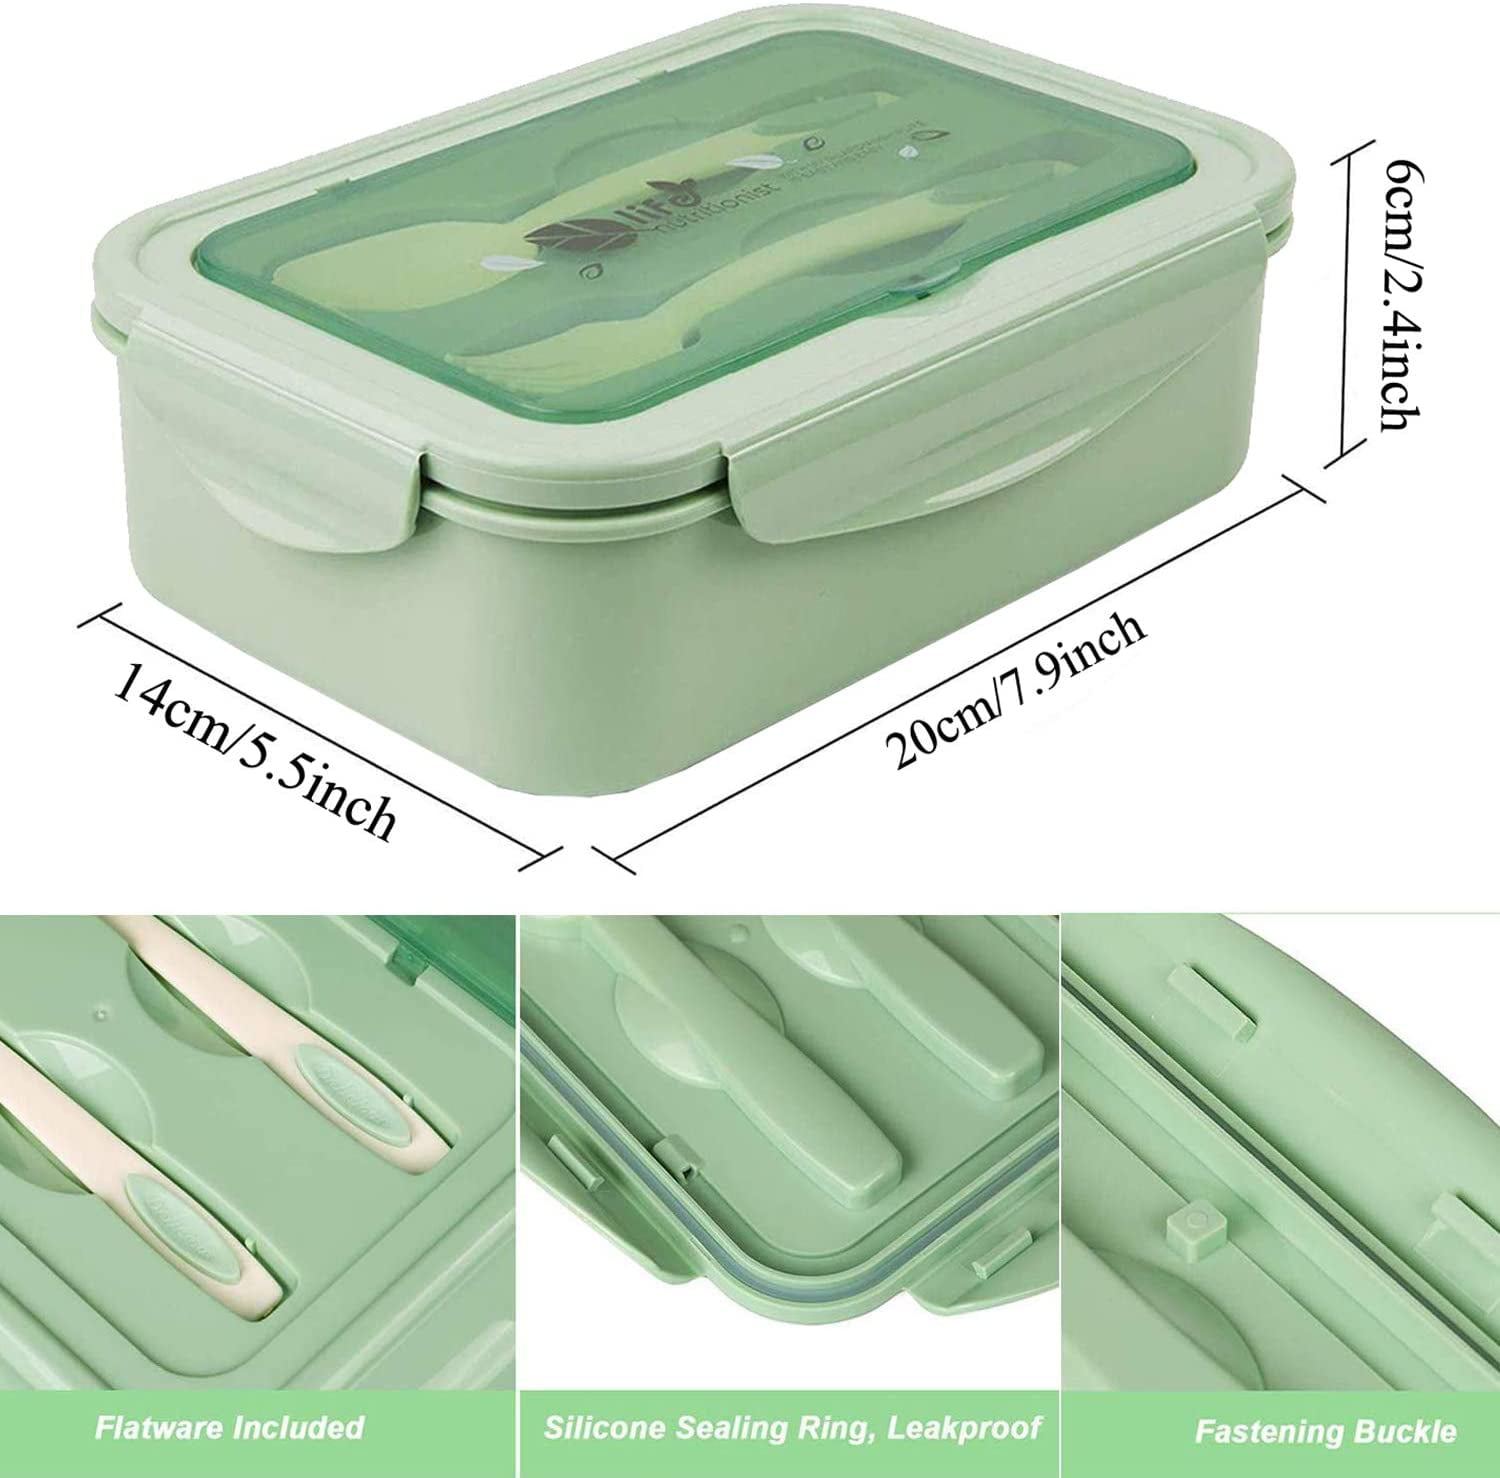 Kitchen & Cabana Set of 3 - Bento Lunch Boxes (2 Removable Compartments) - Snap Shut & Lock Closed, Leak Proof Food Containers. Multi-Colored.